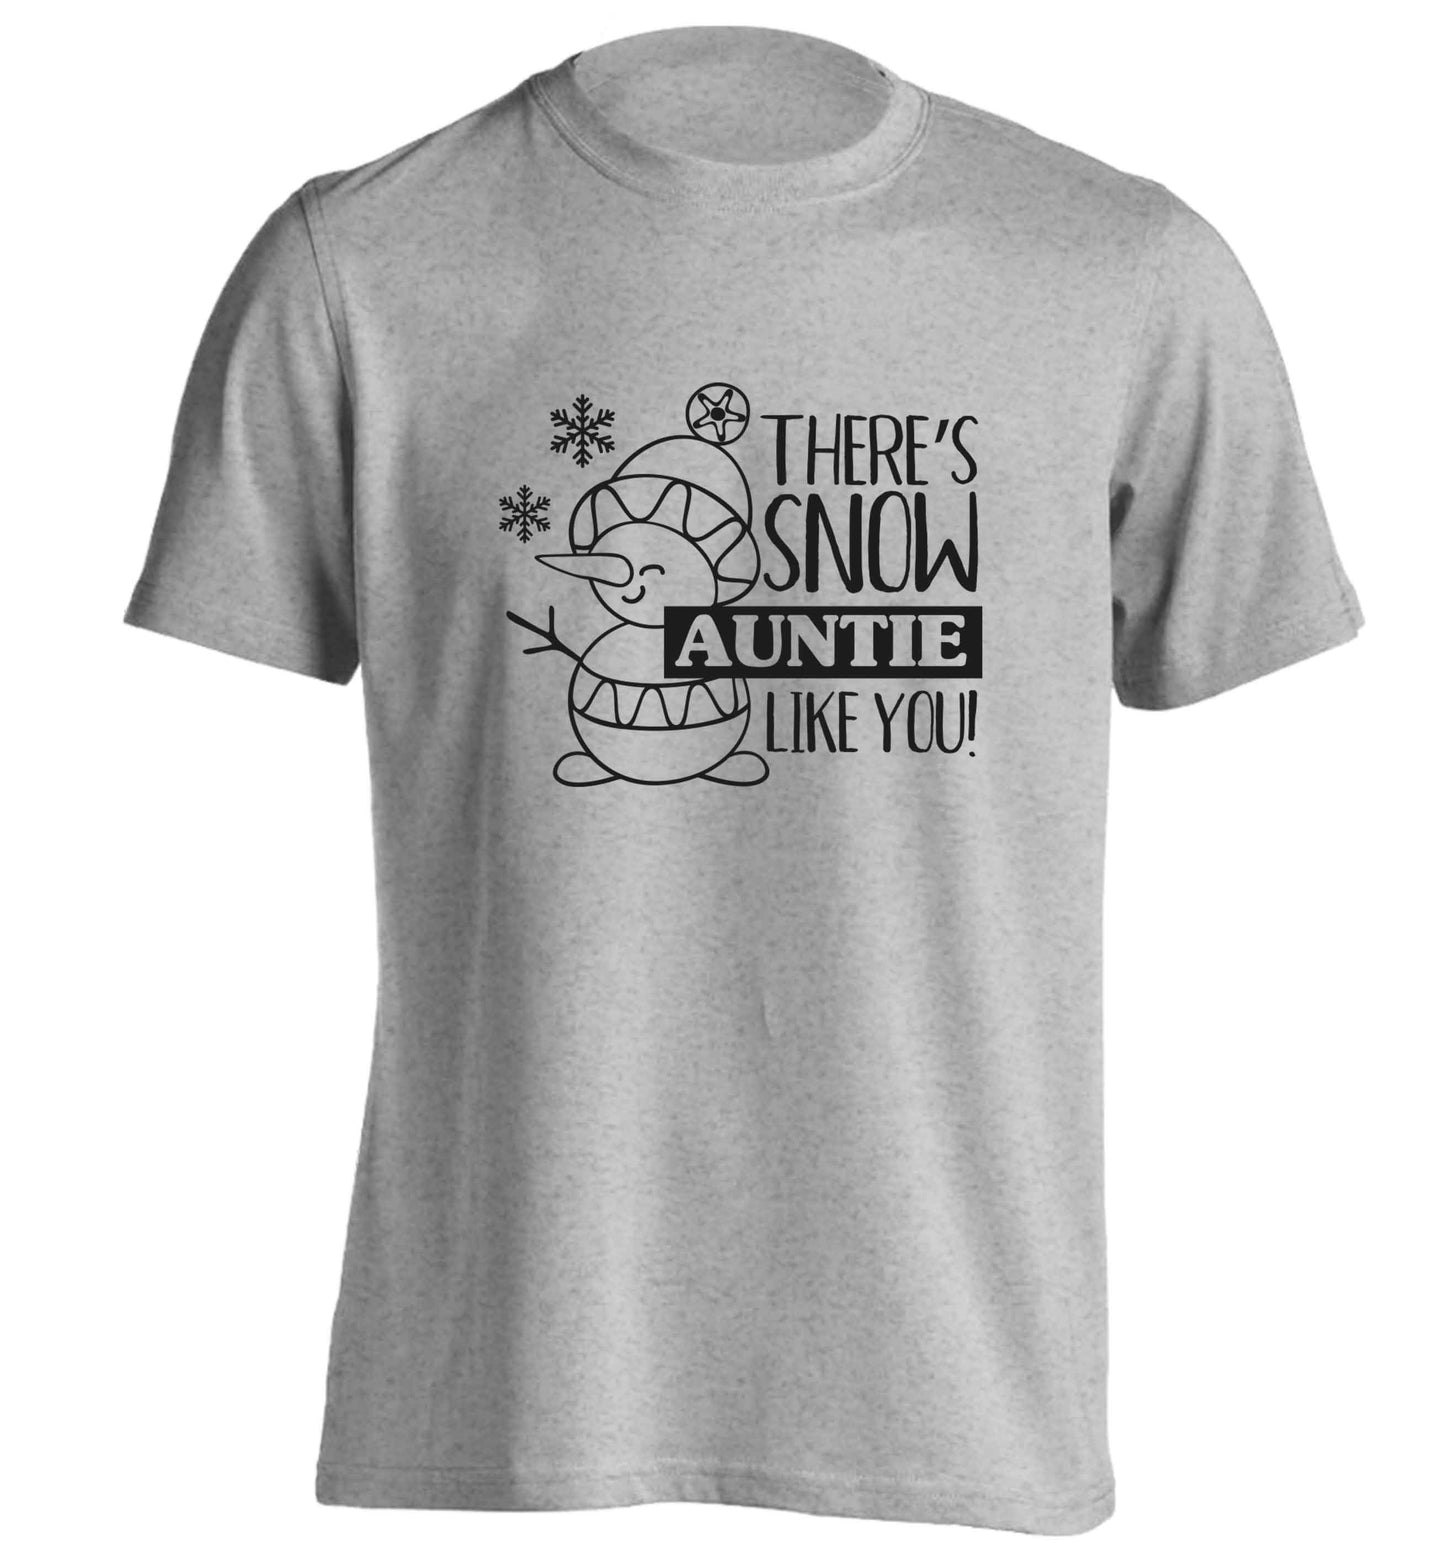 There's snow auntie like you adults unisex grey Tshirt 2XL